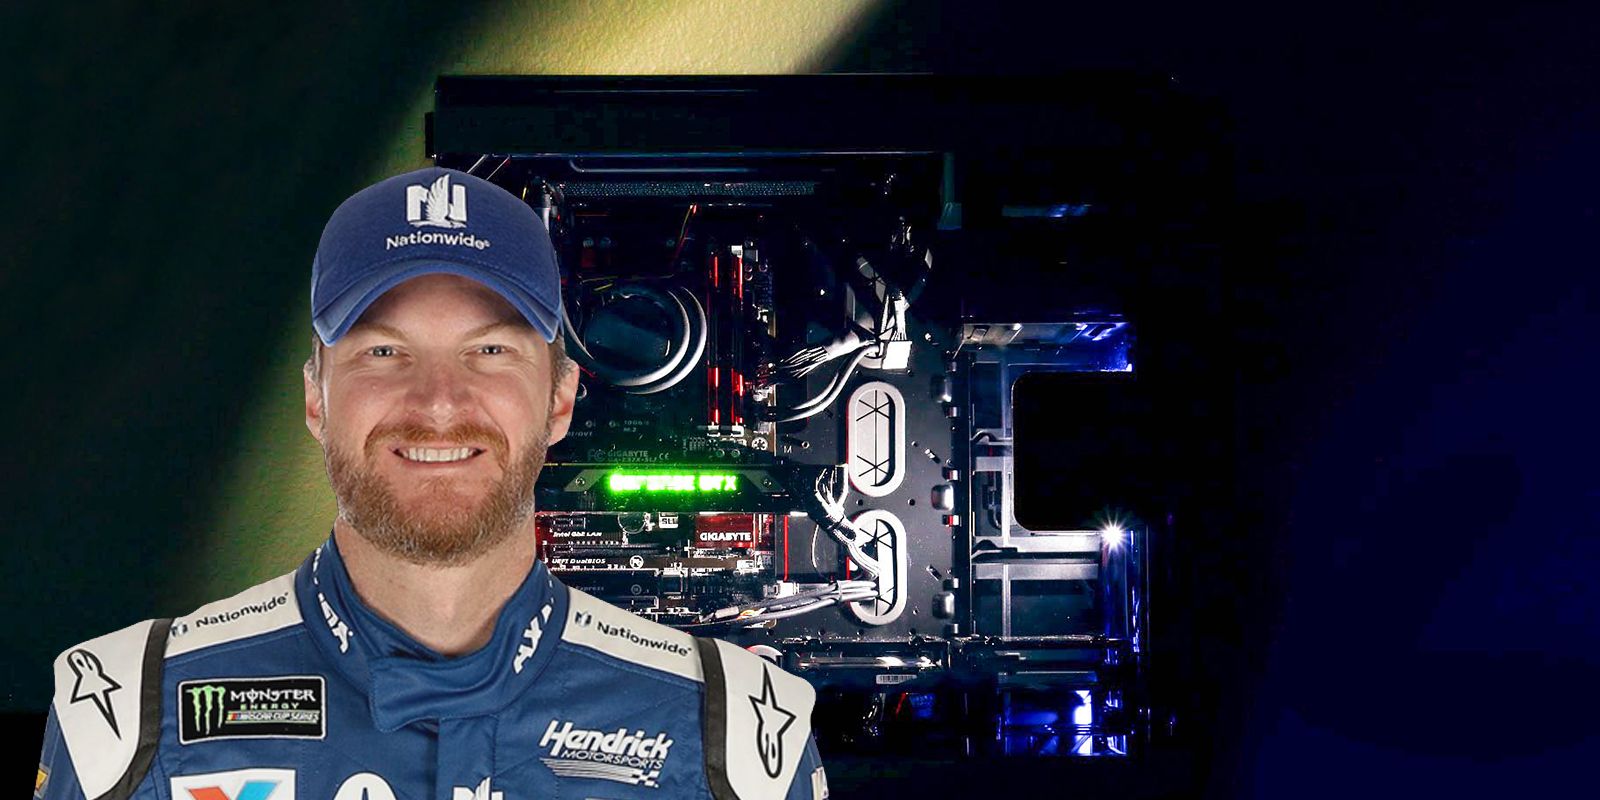 Legendary NASCAR driver reveals that he is a player with an impressive computer build